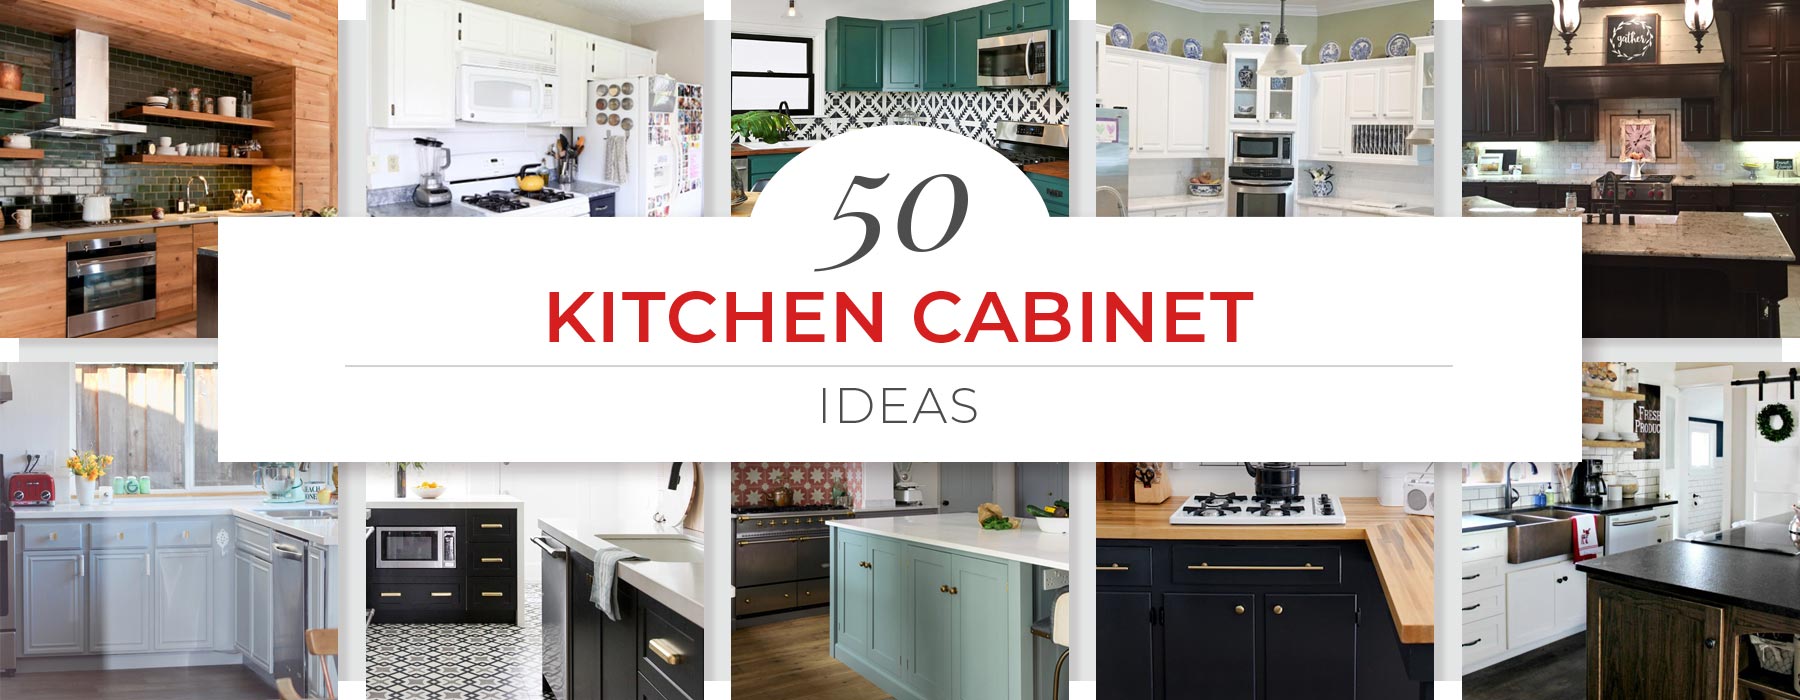 50 kitchen cabinet ideas for 2020